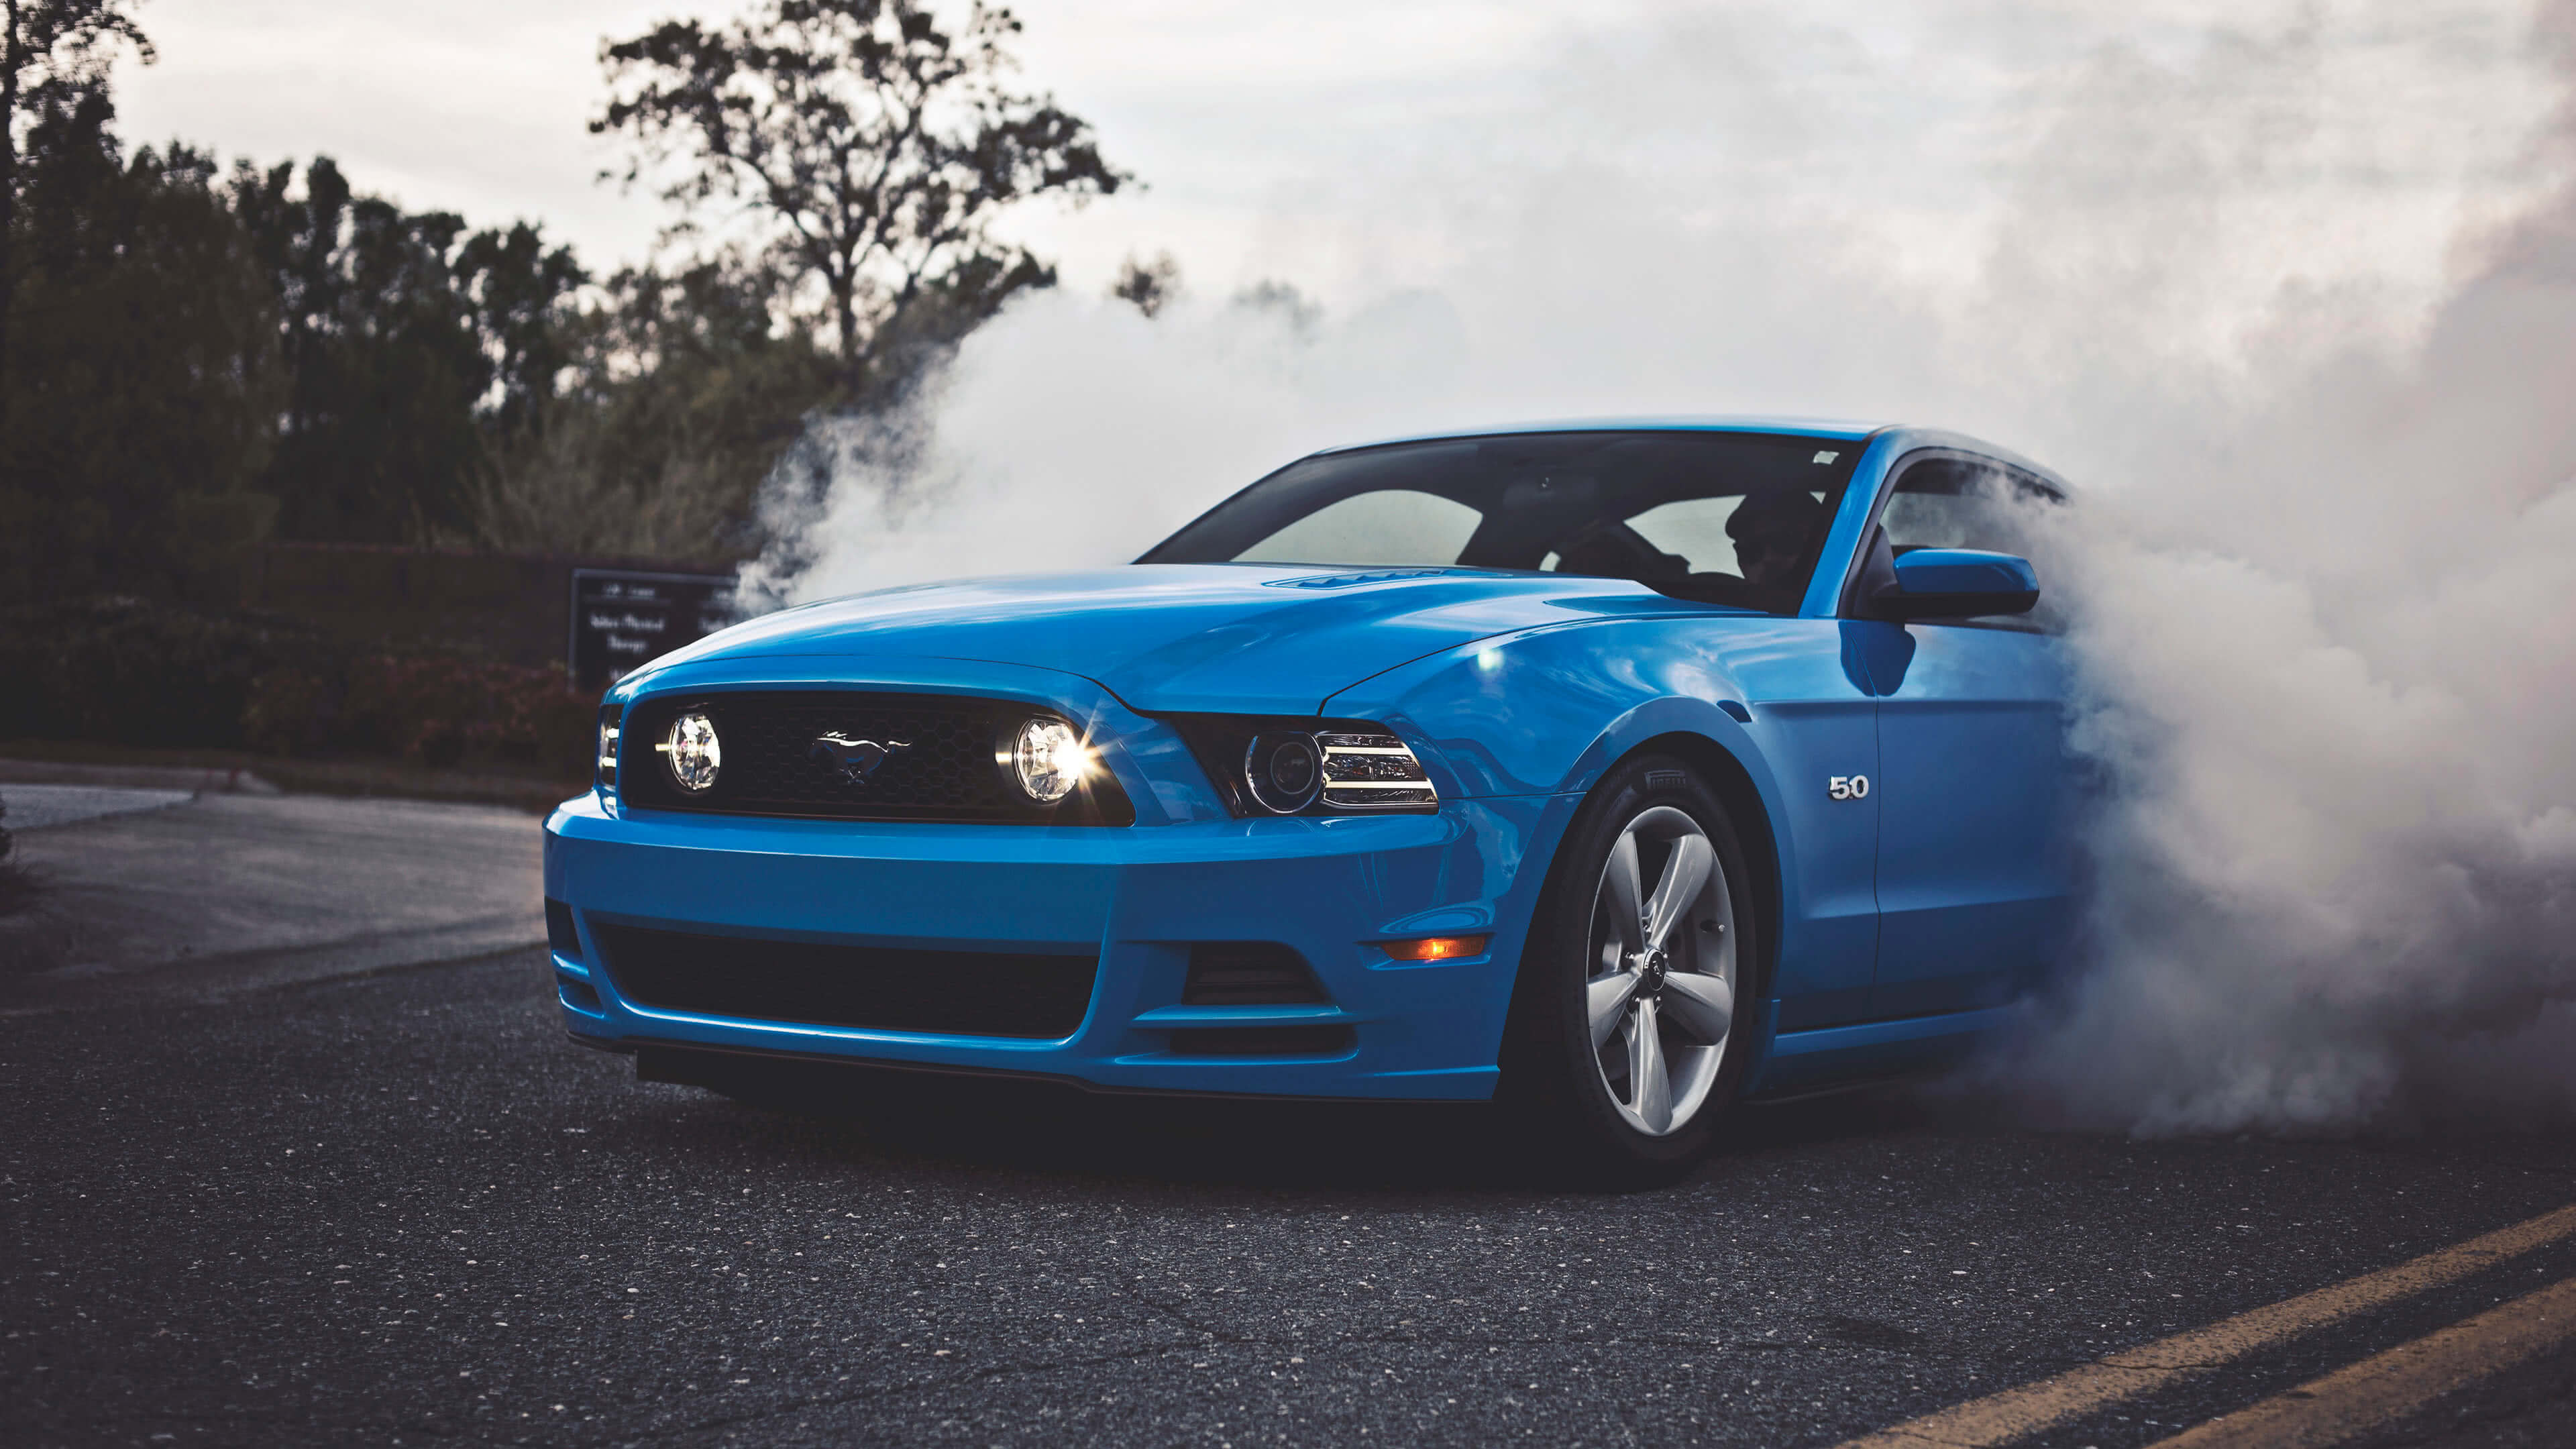 Ford Mustang, Blue Ford Shelby Mustang, 3840x2160 4K Desktop